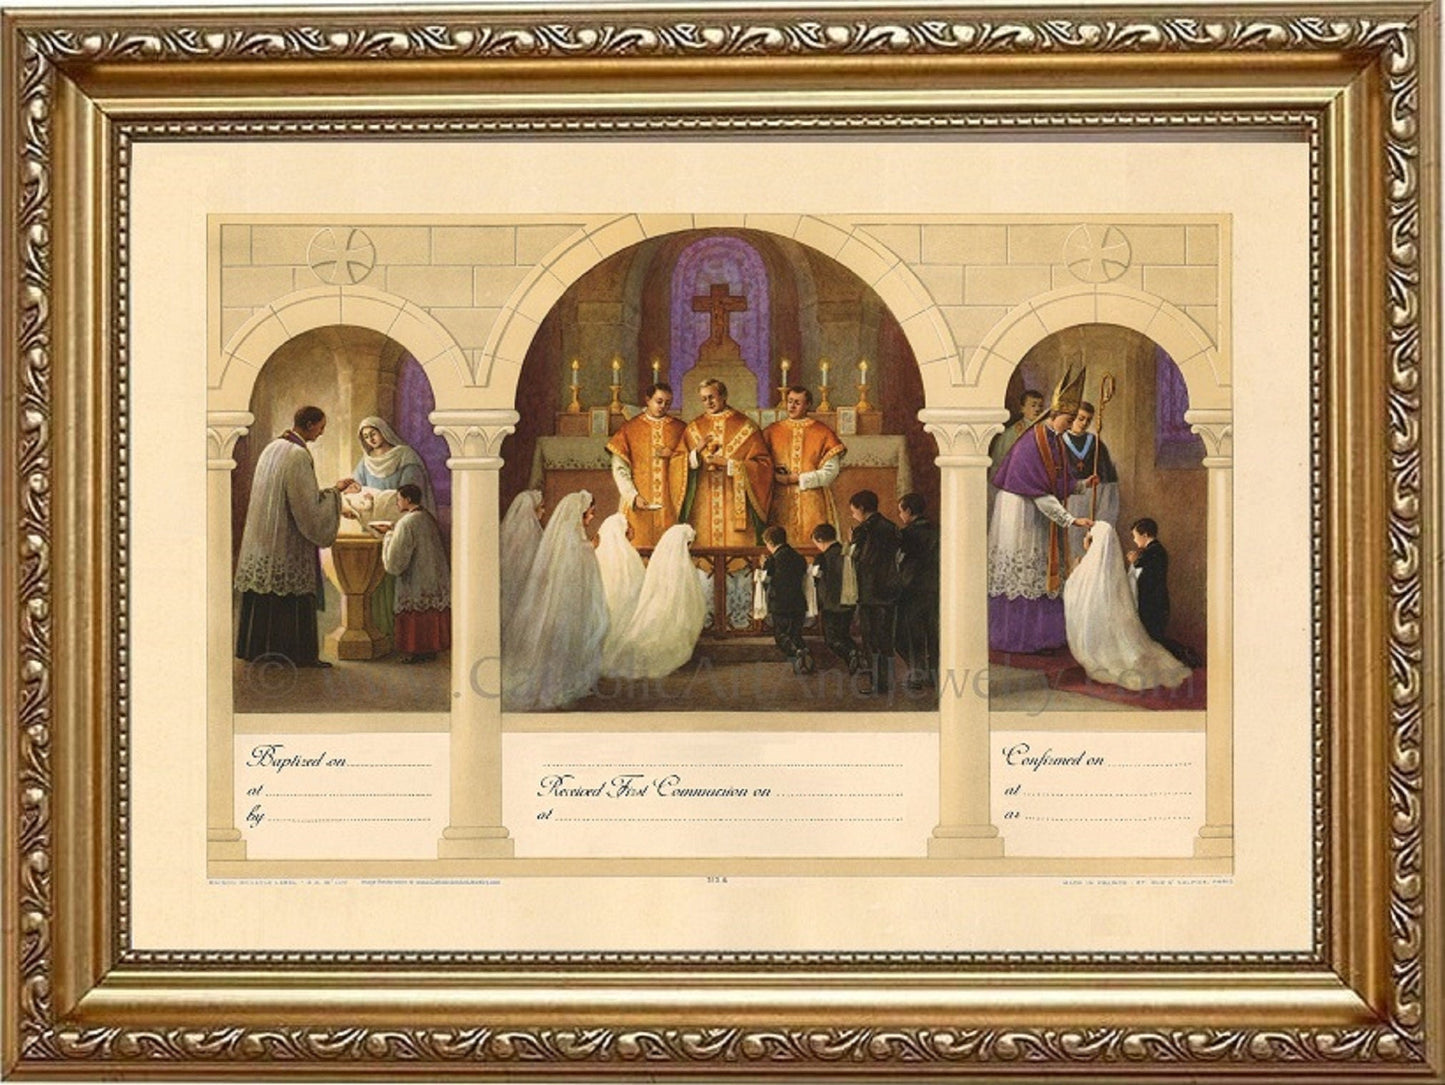 3 Sacraments Certificate – Baptism, First Communion, Confirmation – 2 sizes – Based on a Vintage Certificate - Catholic Art and Jewelry